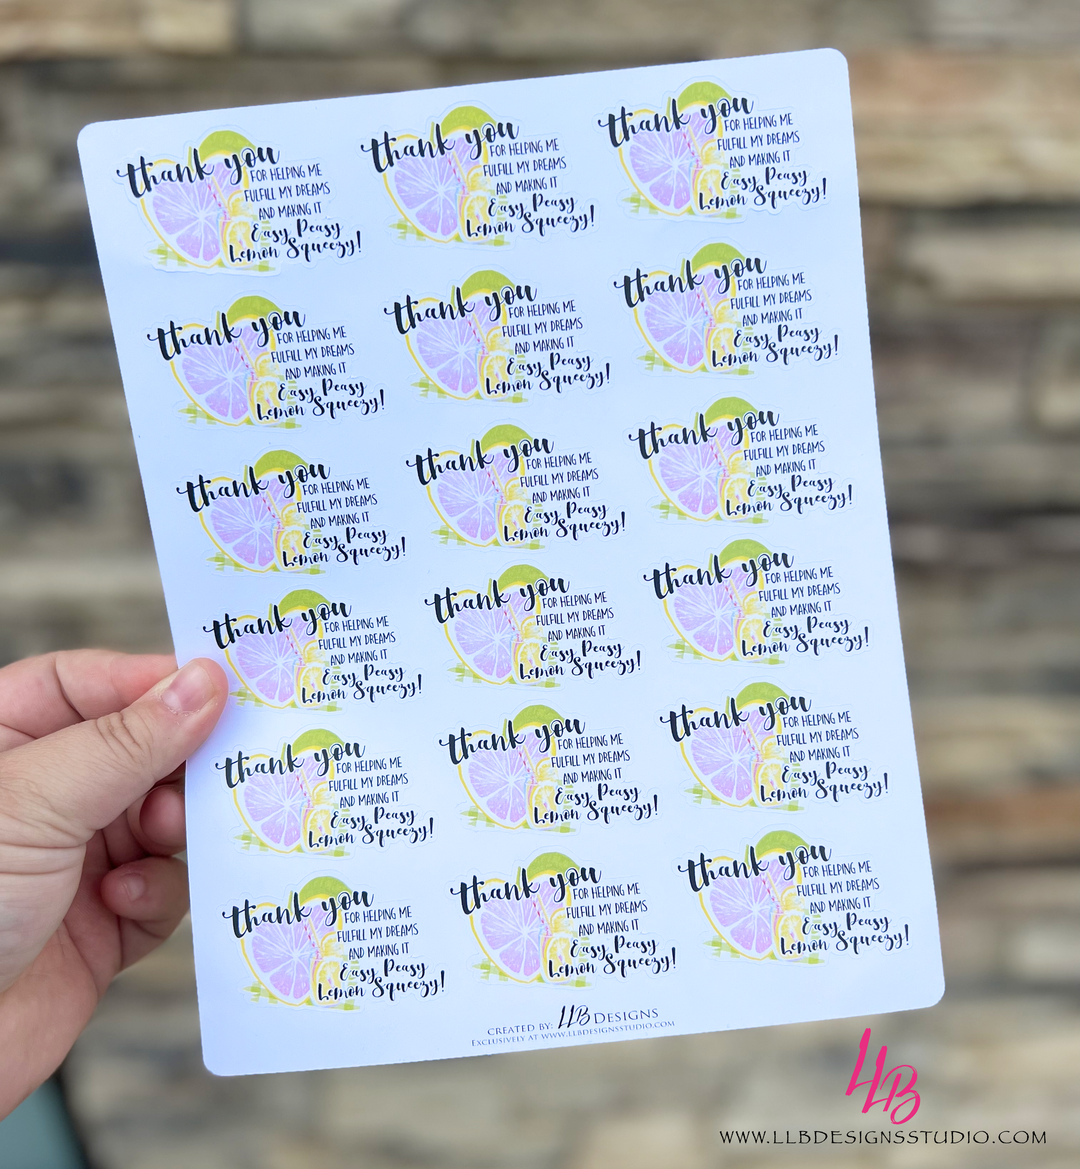 Easy Peazy Lemon Squeezy Thank You Sticker |  Packaging Stickers | Business Branding | Small Shop Stickers | Sticker #: S0418 | Ready To Ship